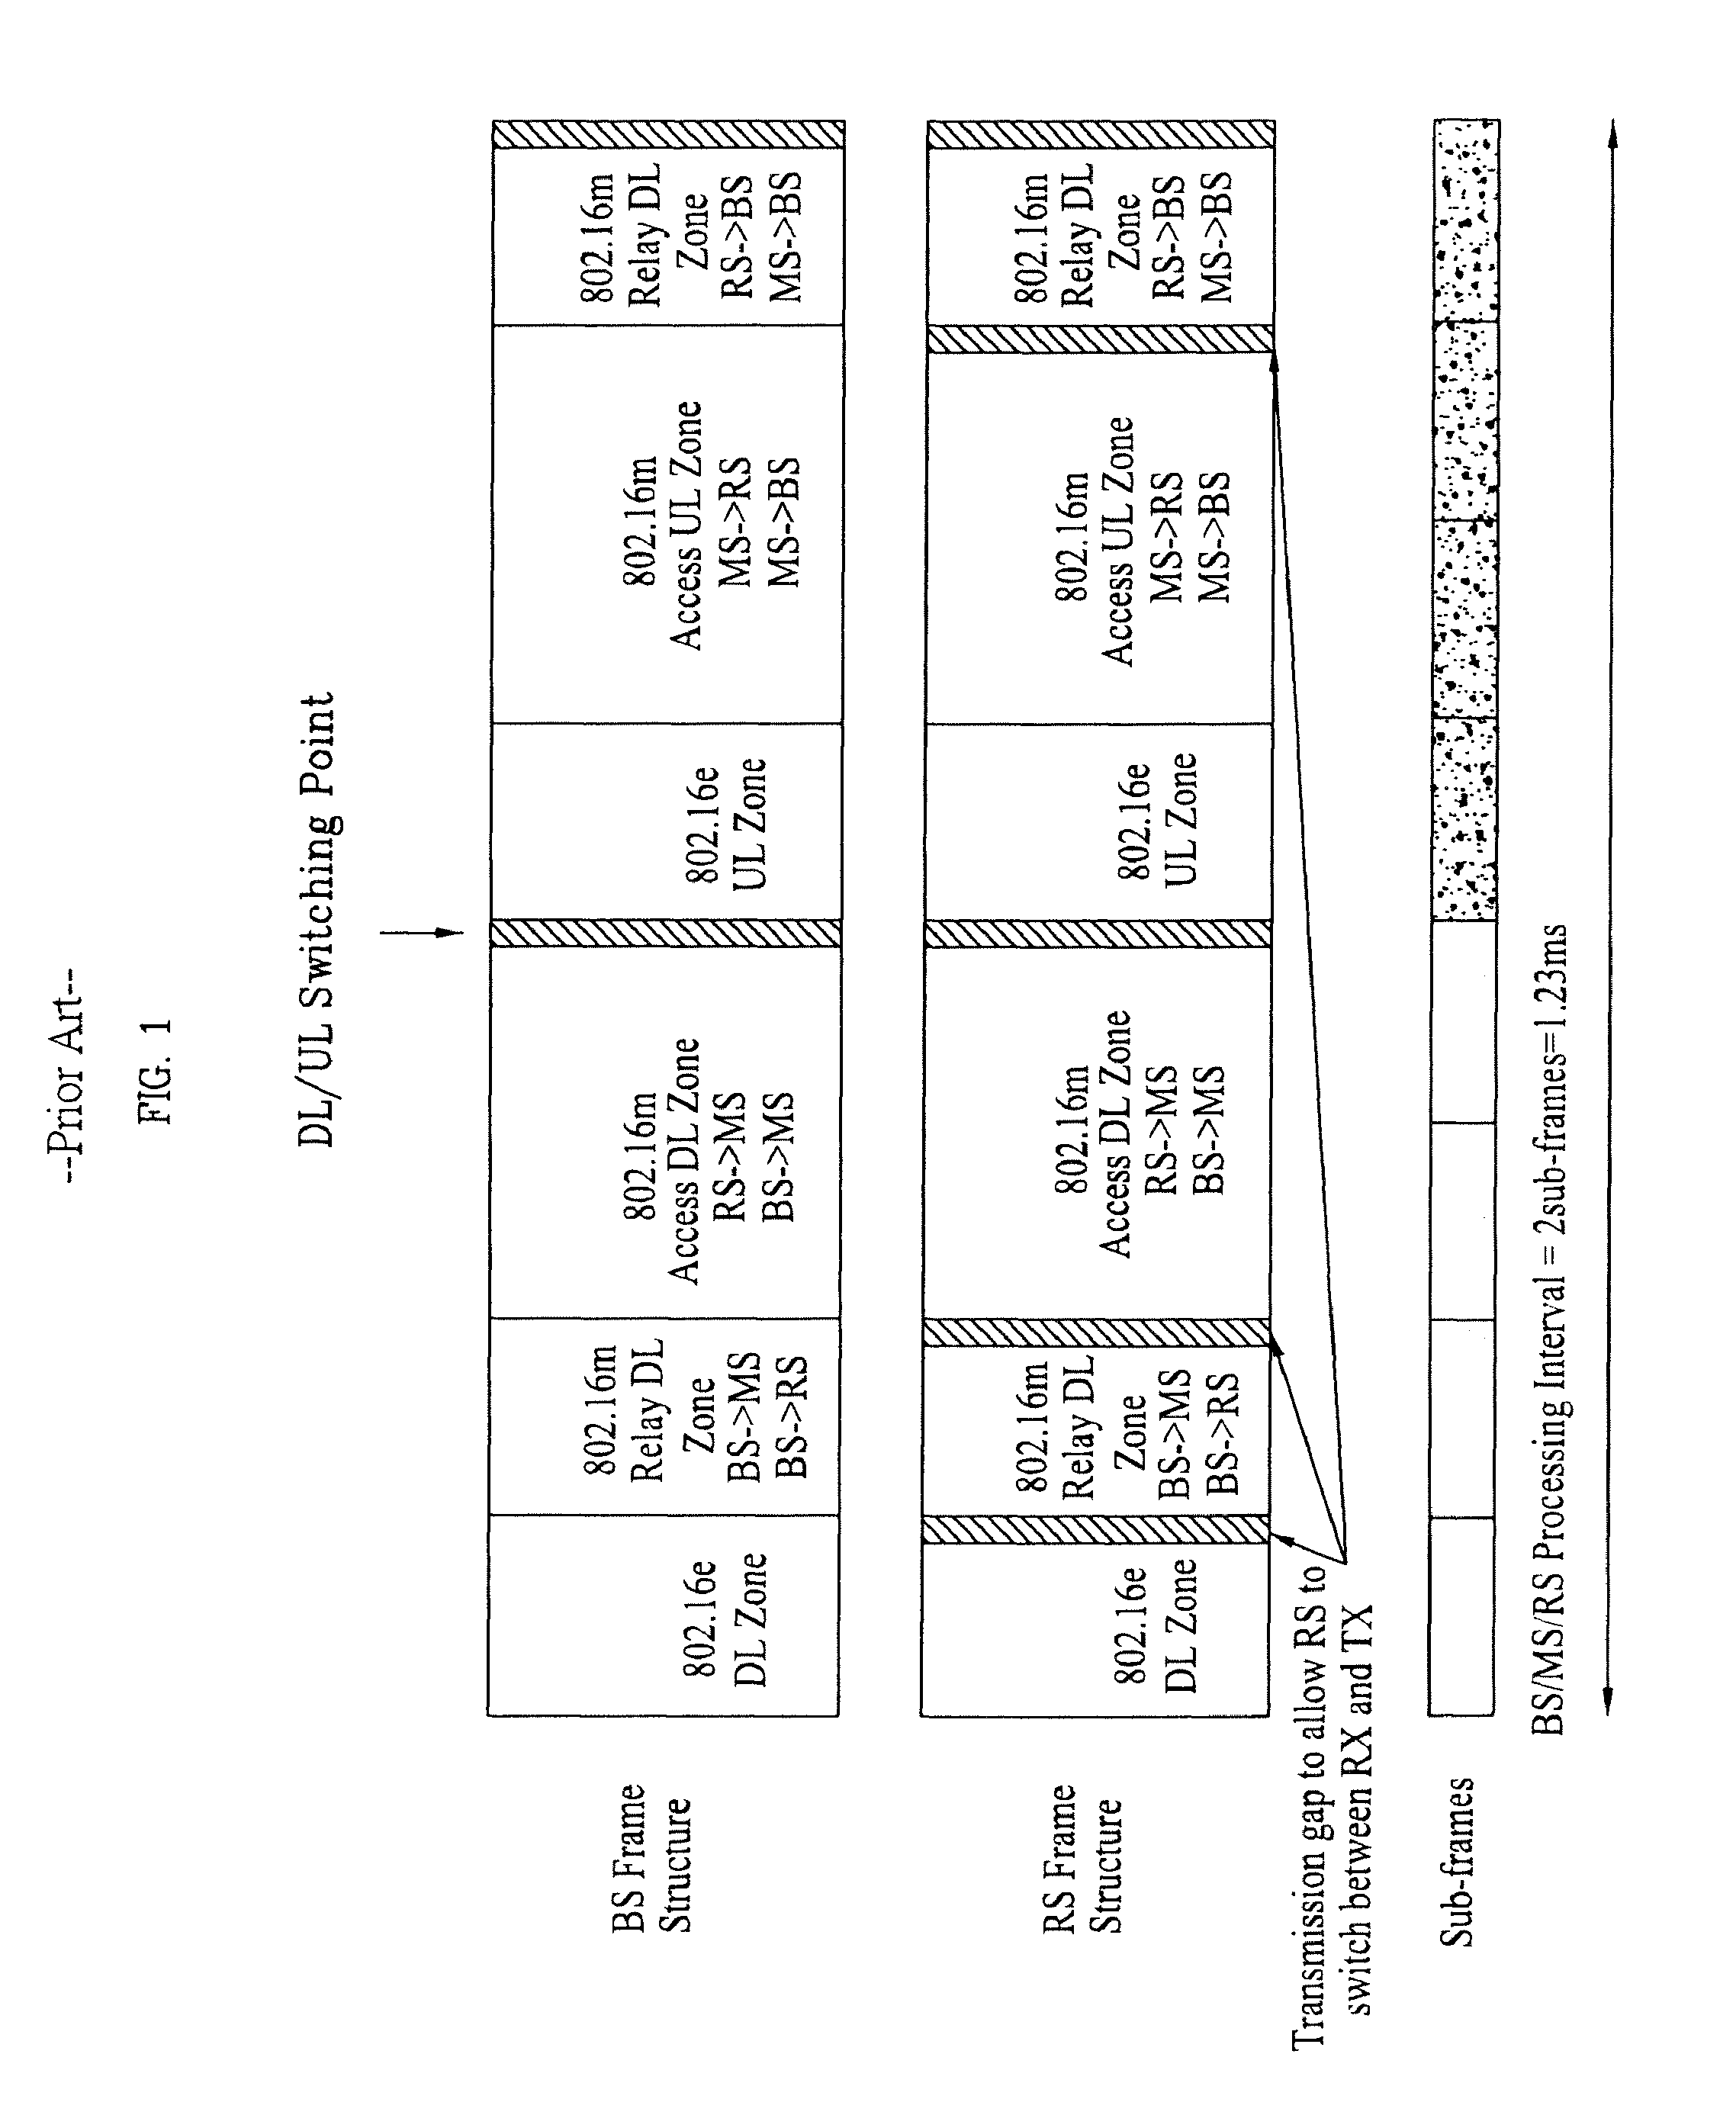 Method for communicating in a mobile station and system with relay stations